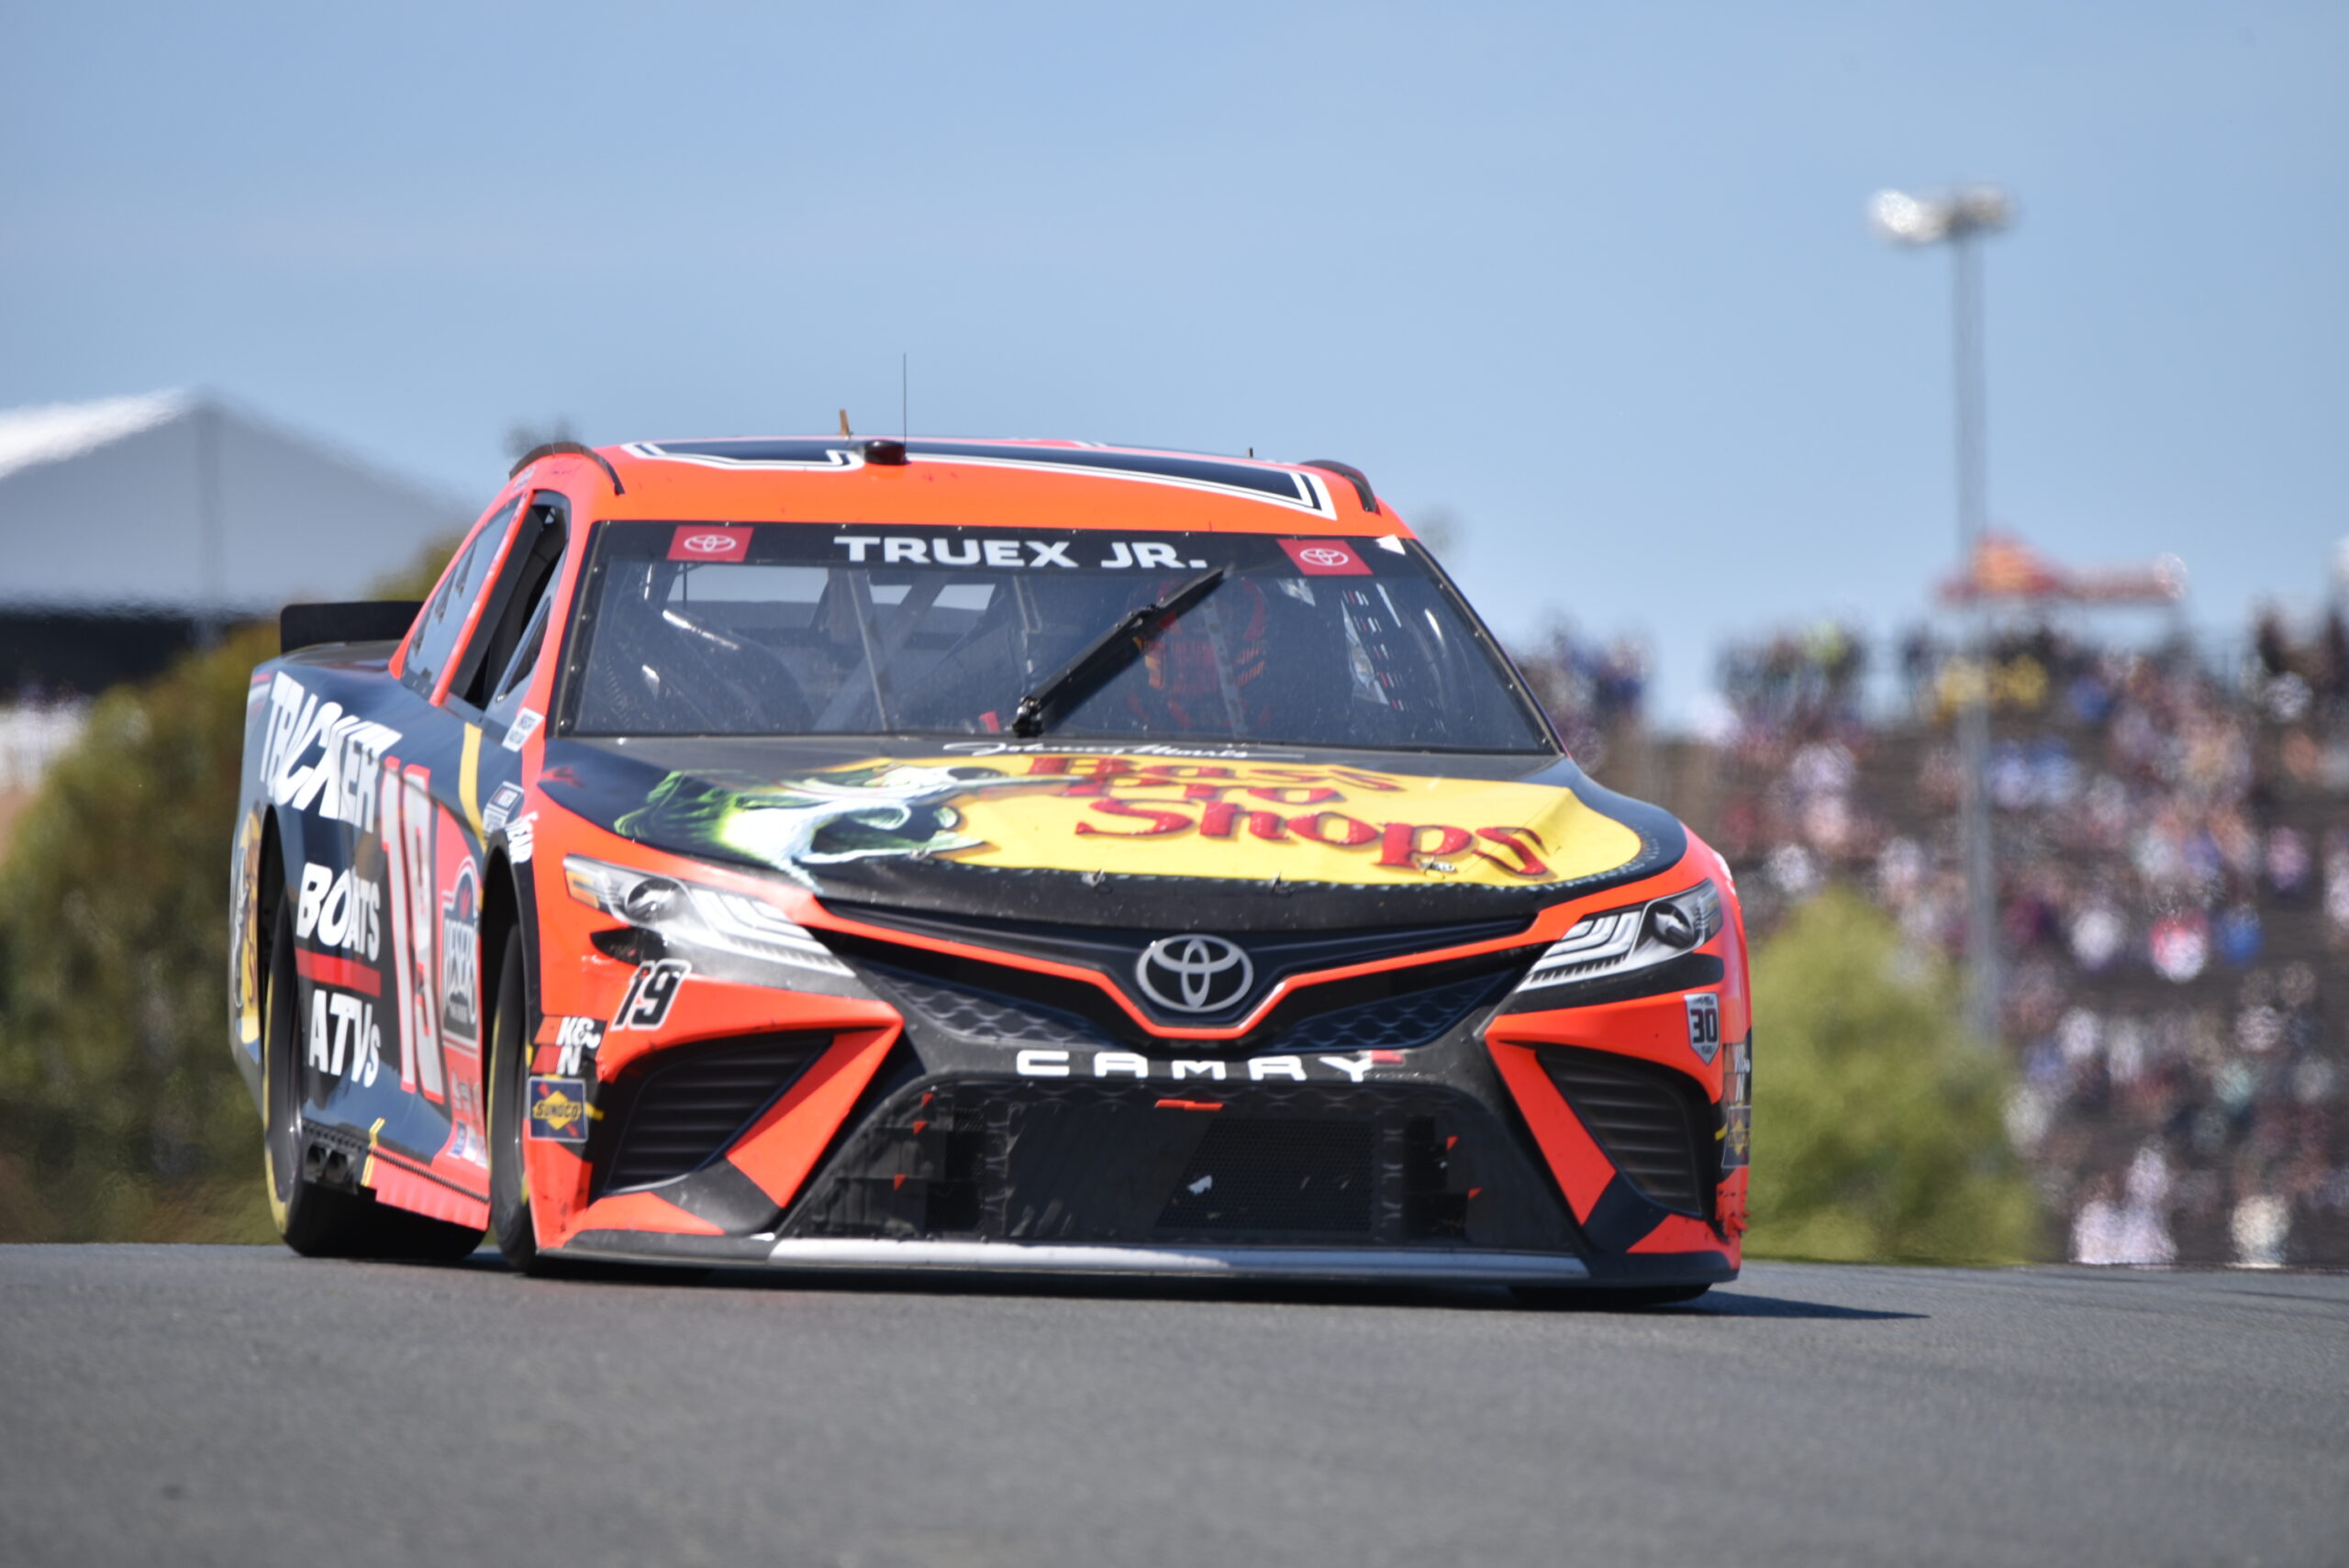 Consequently, Martin Truex Jr's Sonoma streak ended but with a podium. (Photo: Luis Torres/The Podium Finish)